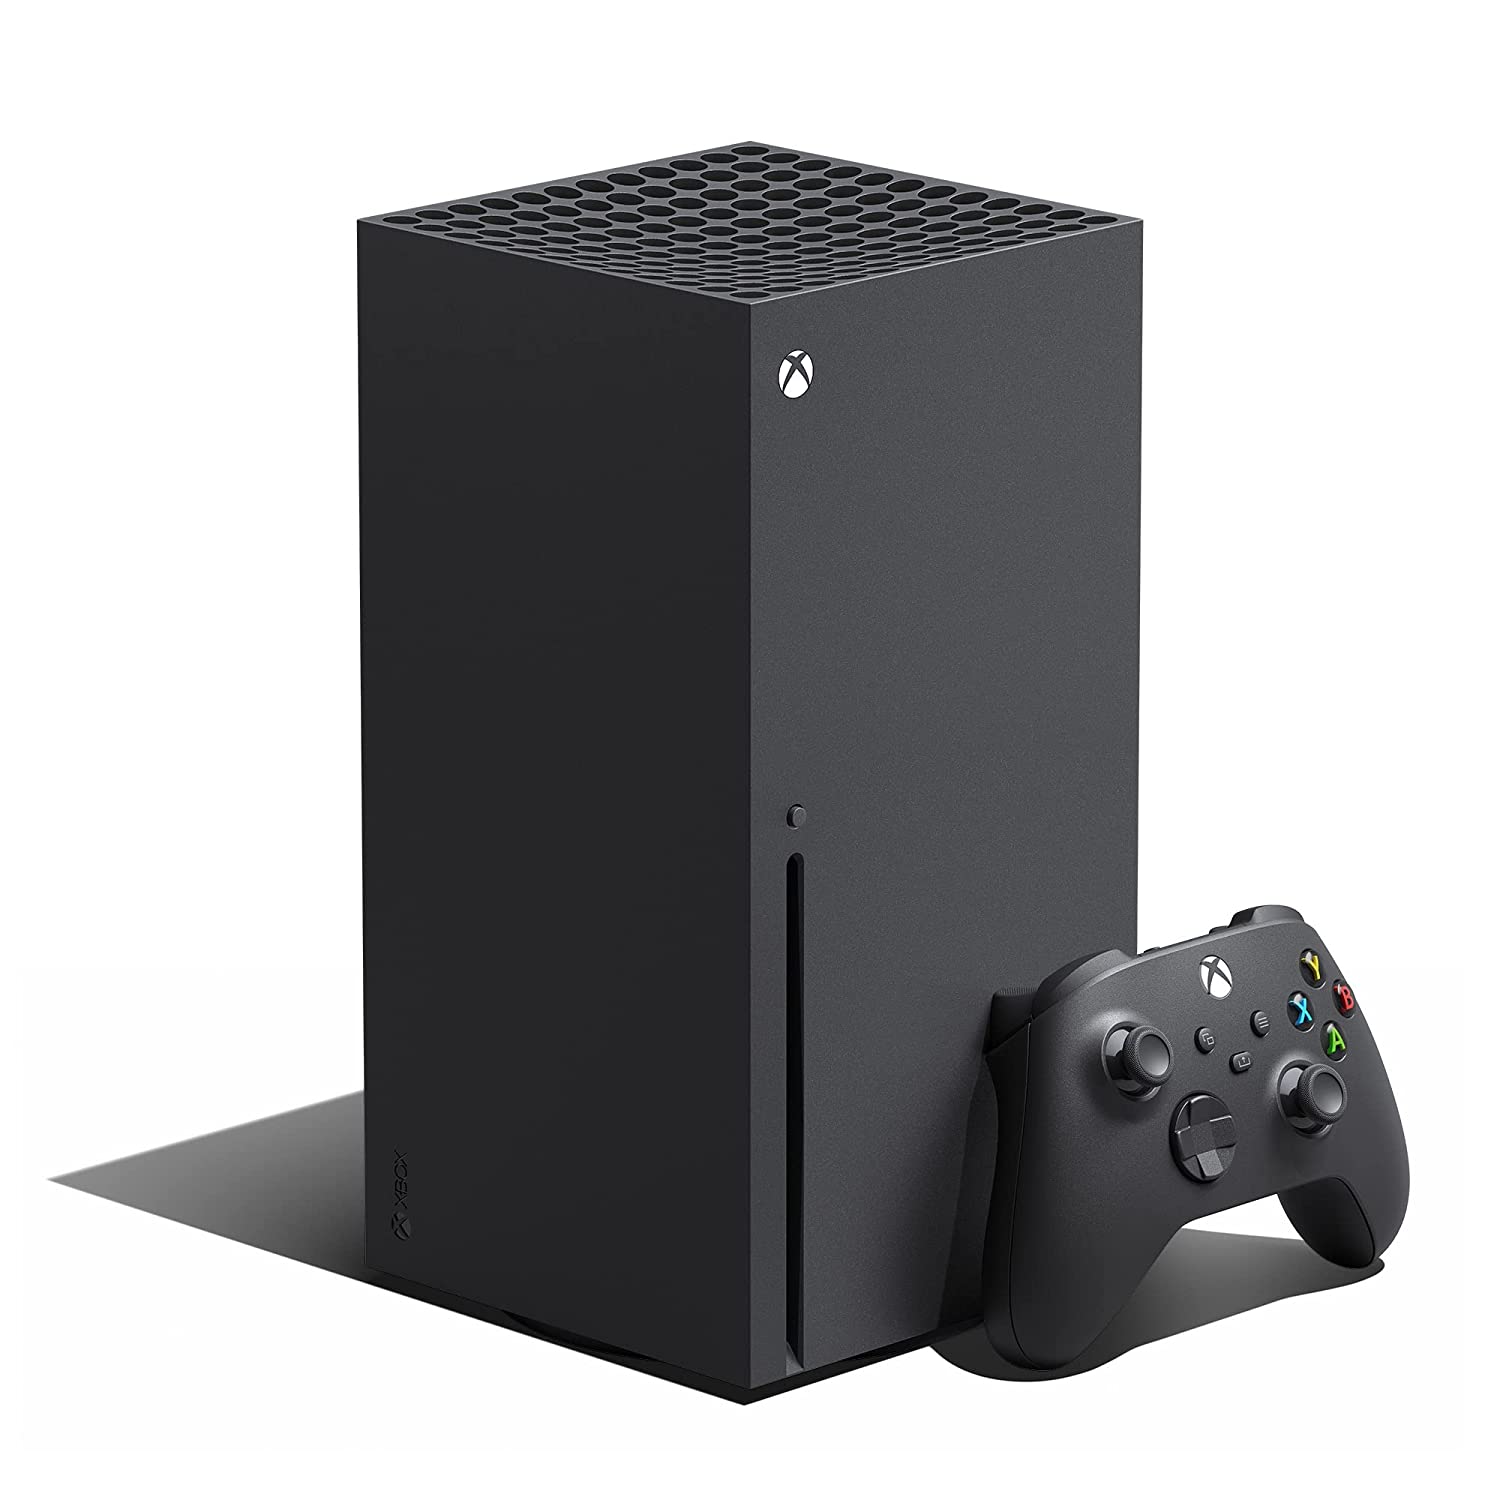 2020 New - Xbox Series X - Gaming Console - 1TB SSD - Disc Drive - image 1 of 3